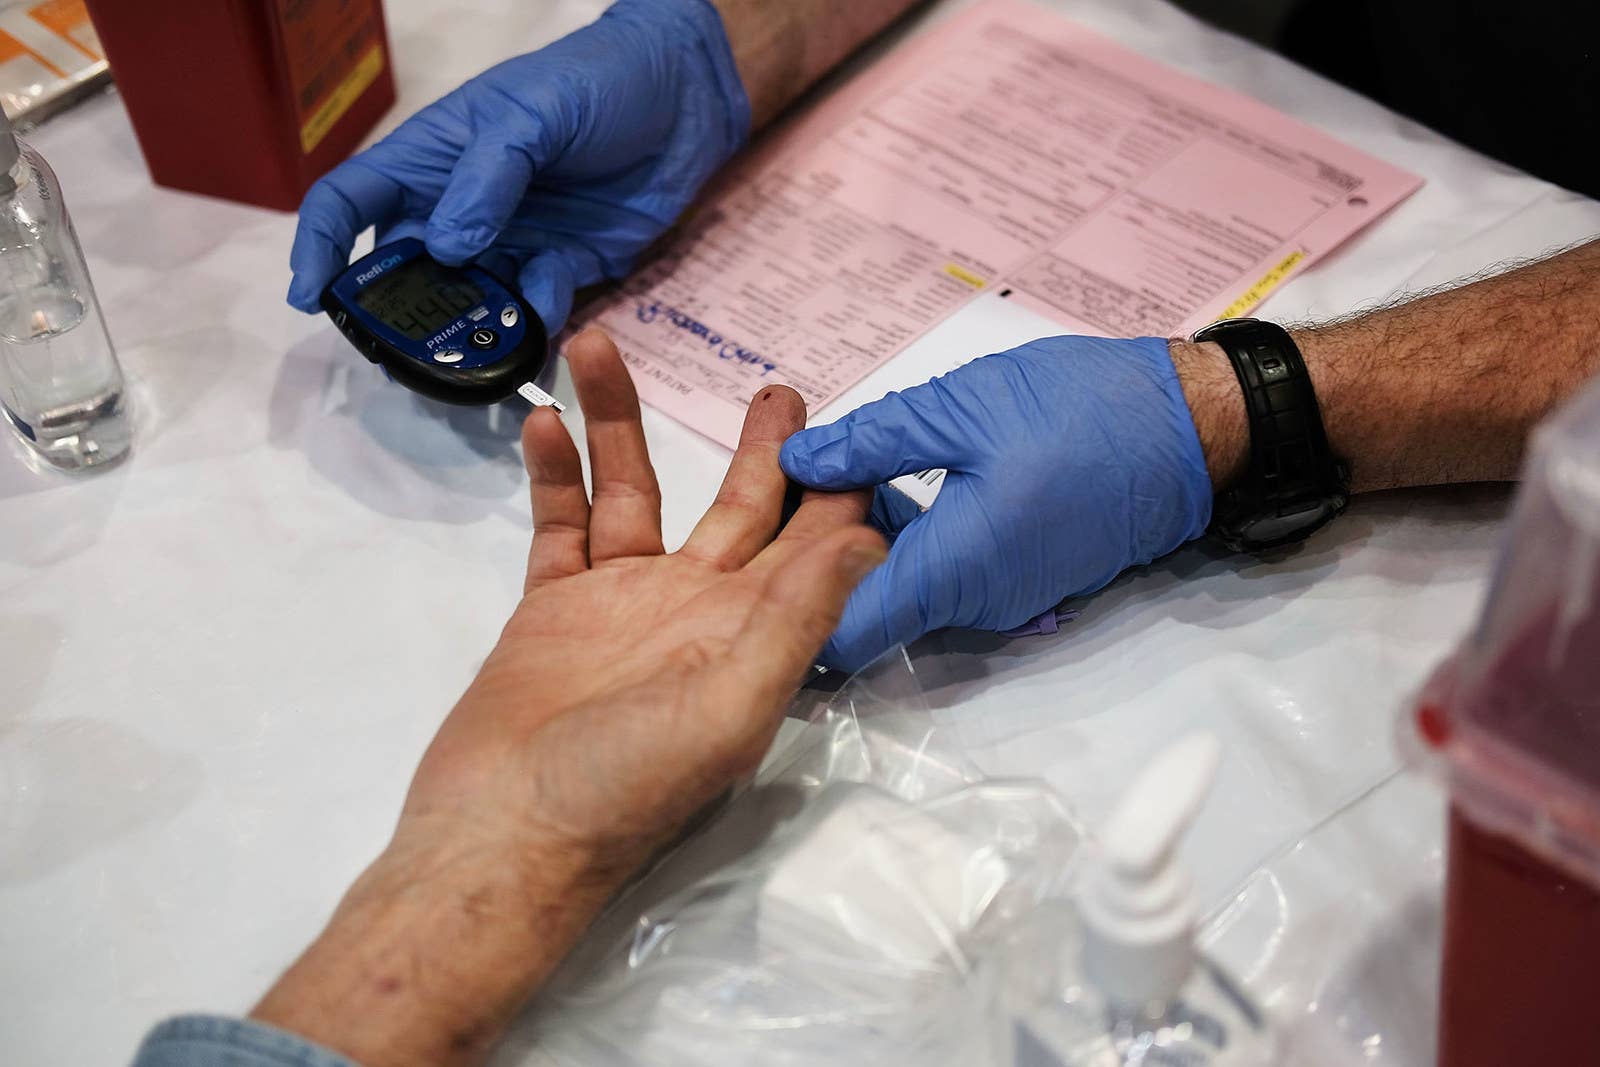 A man has his blood tested at the RAM clinic in Olean, New York, on June 10.